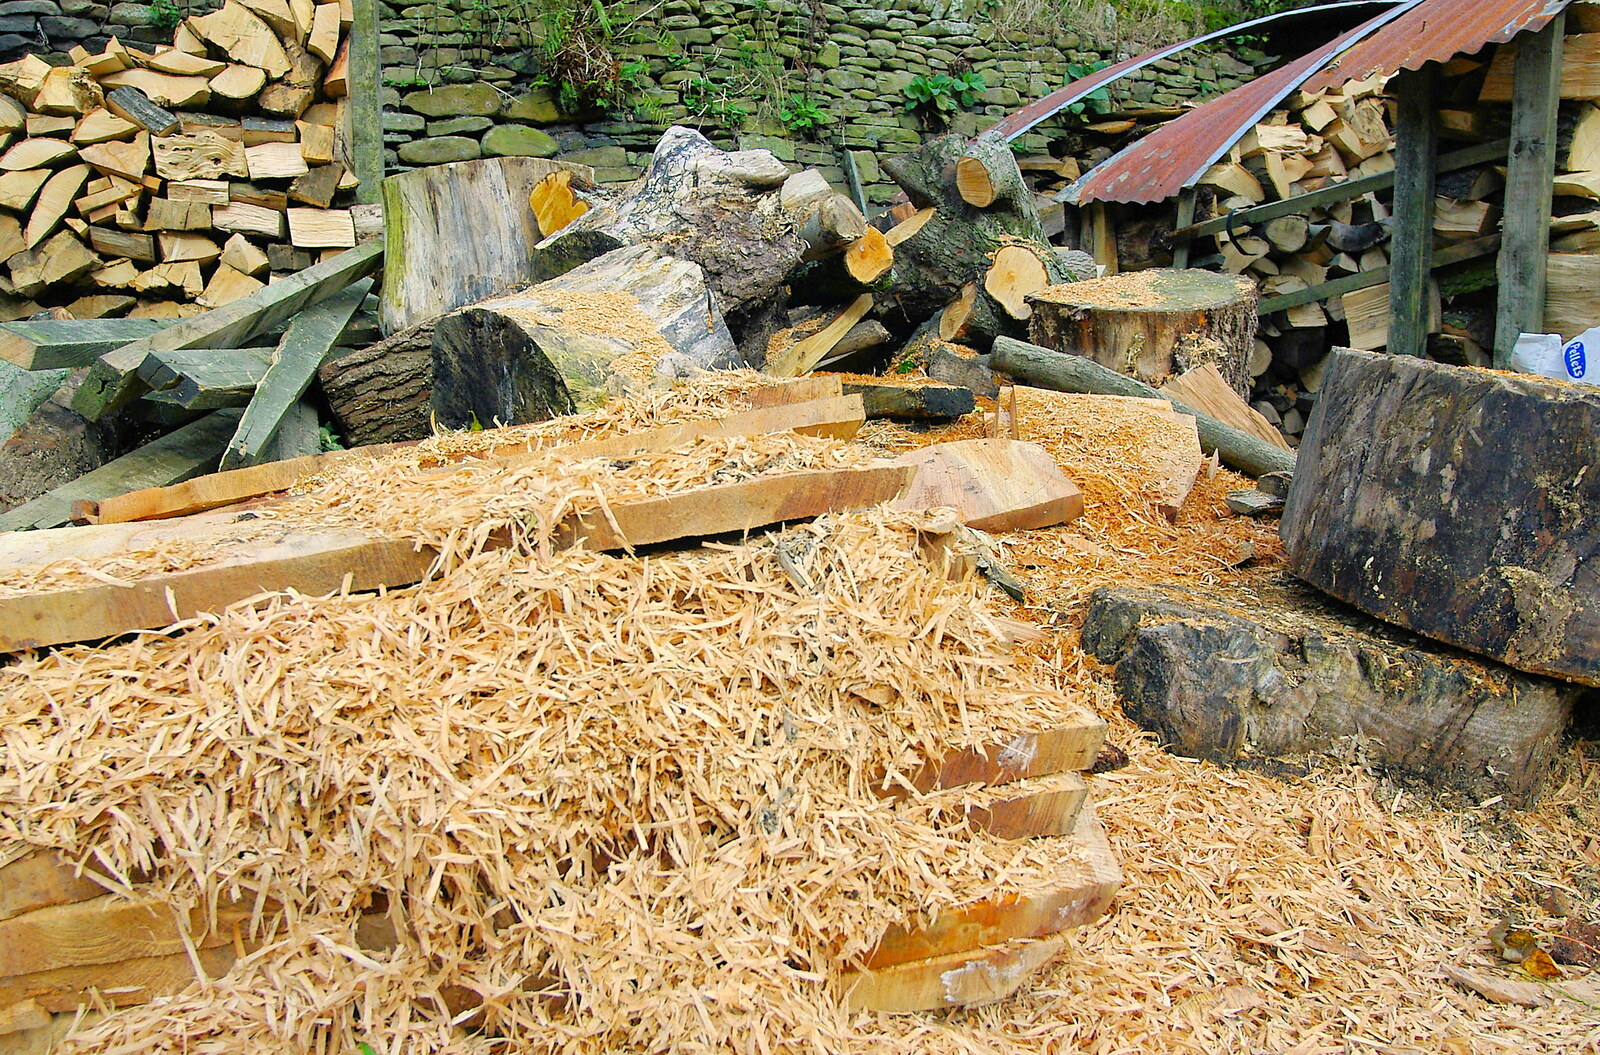 Pile of wood-chips from The Pennine Way: Lost on Kinder Scout, Derbyshire - 9th October 2005